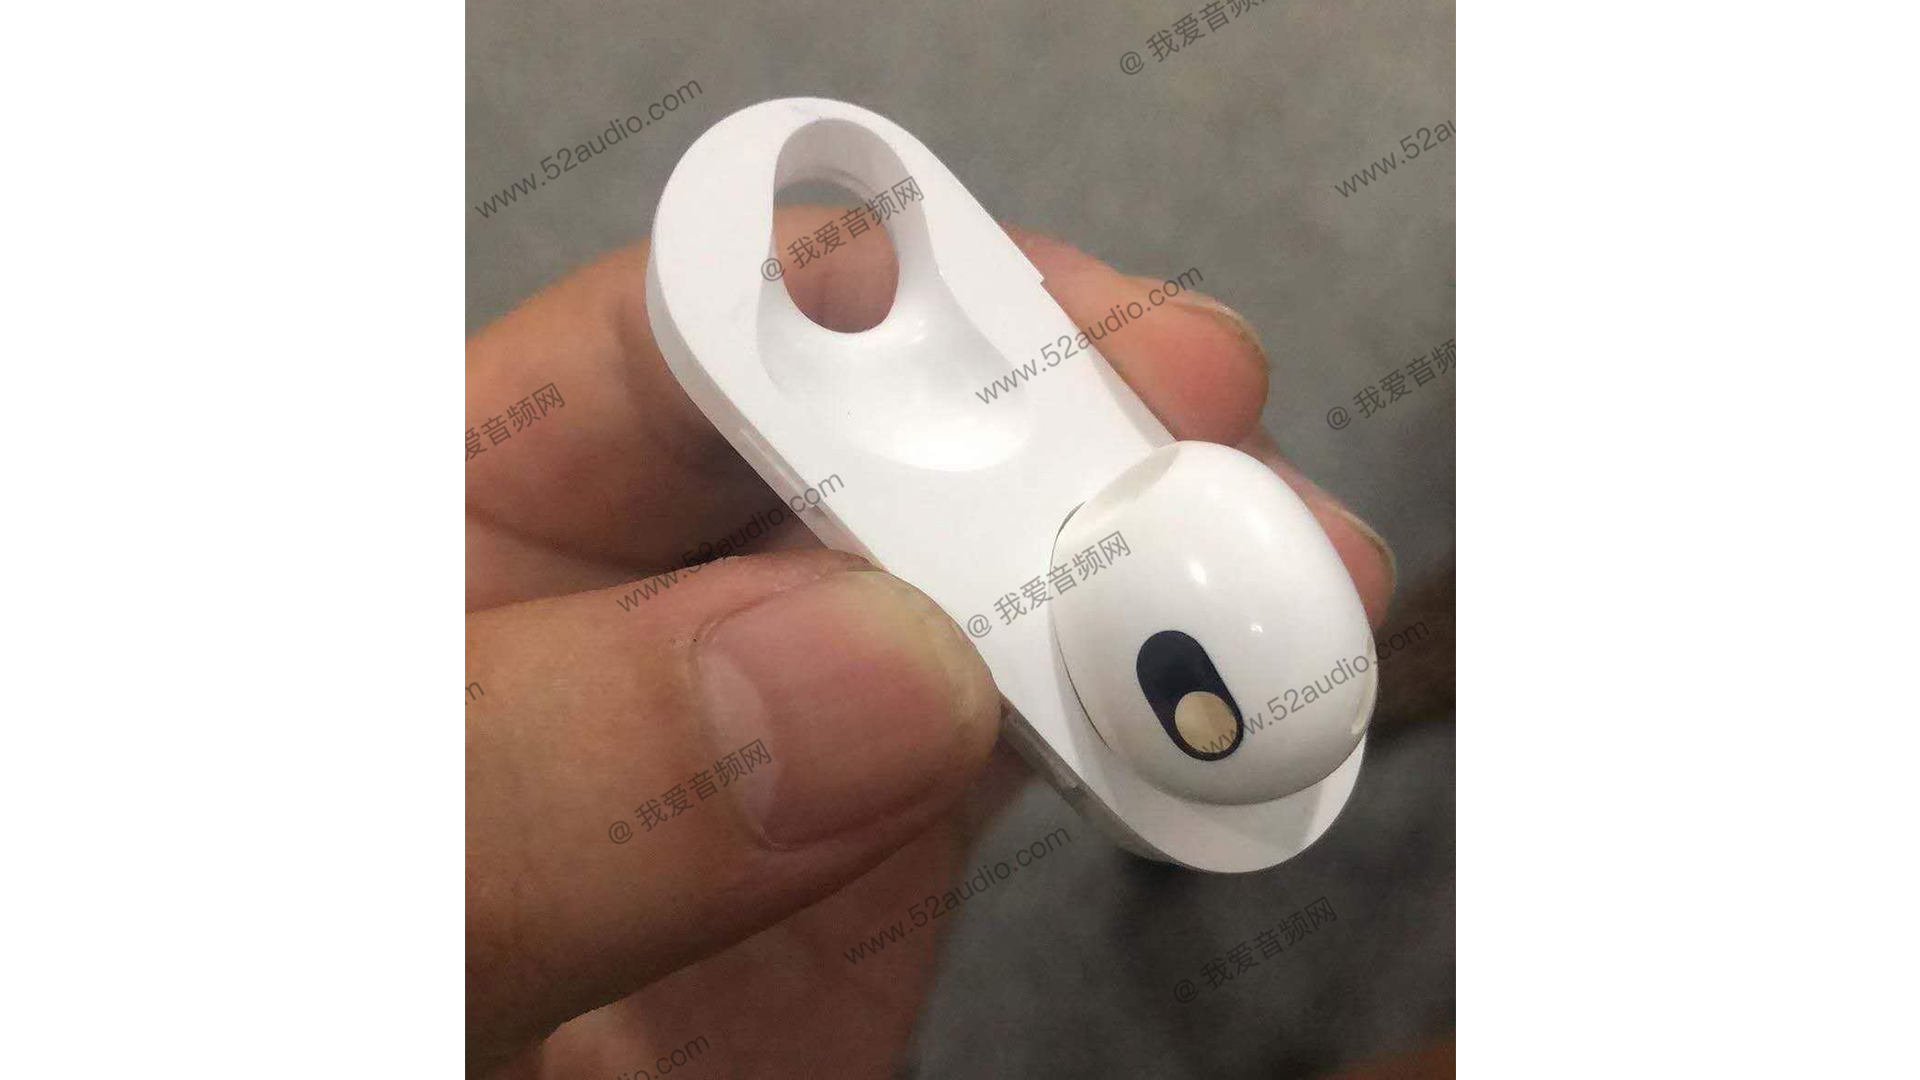 Alleged of AirPods 3 parts shows AirPods Pro-inspired design - 9to5Mac